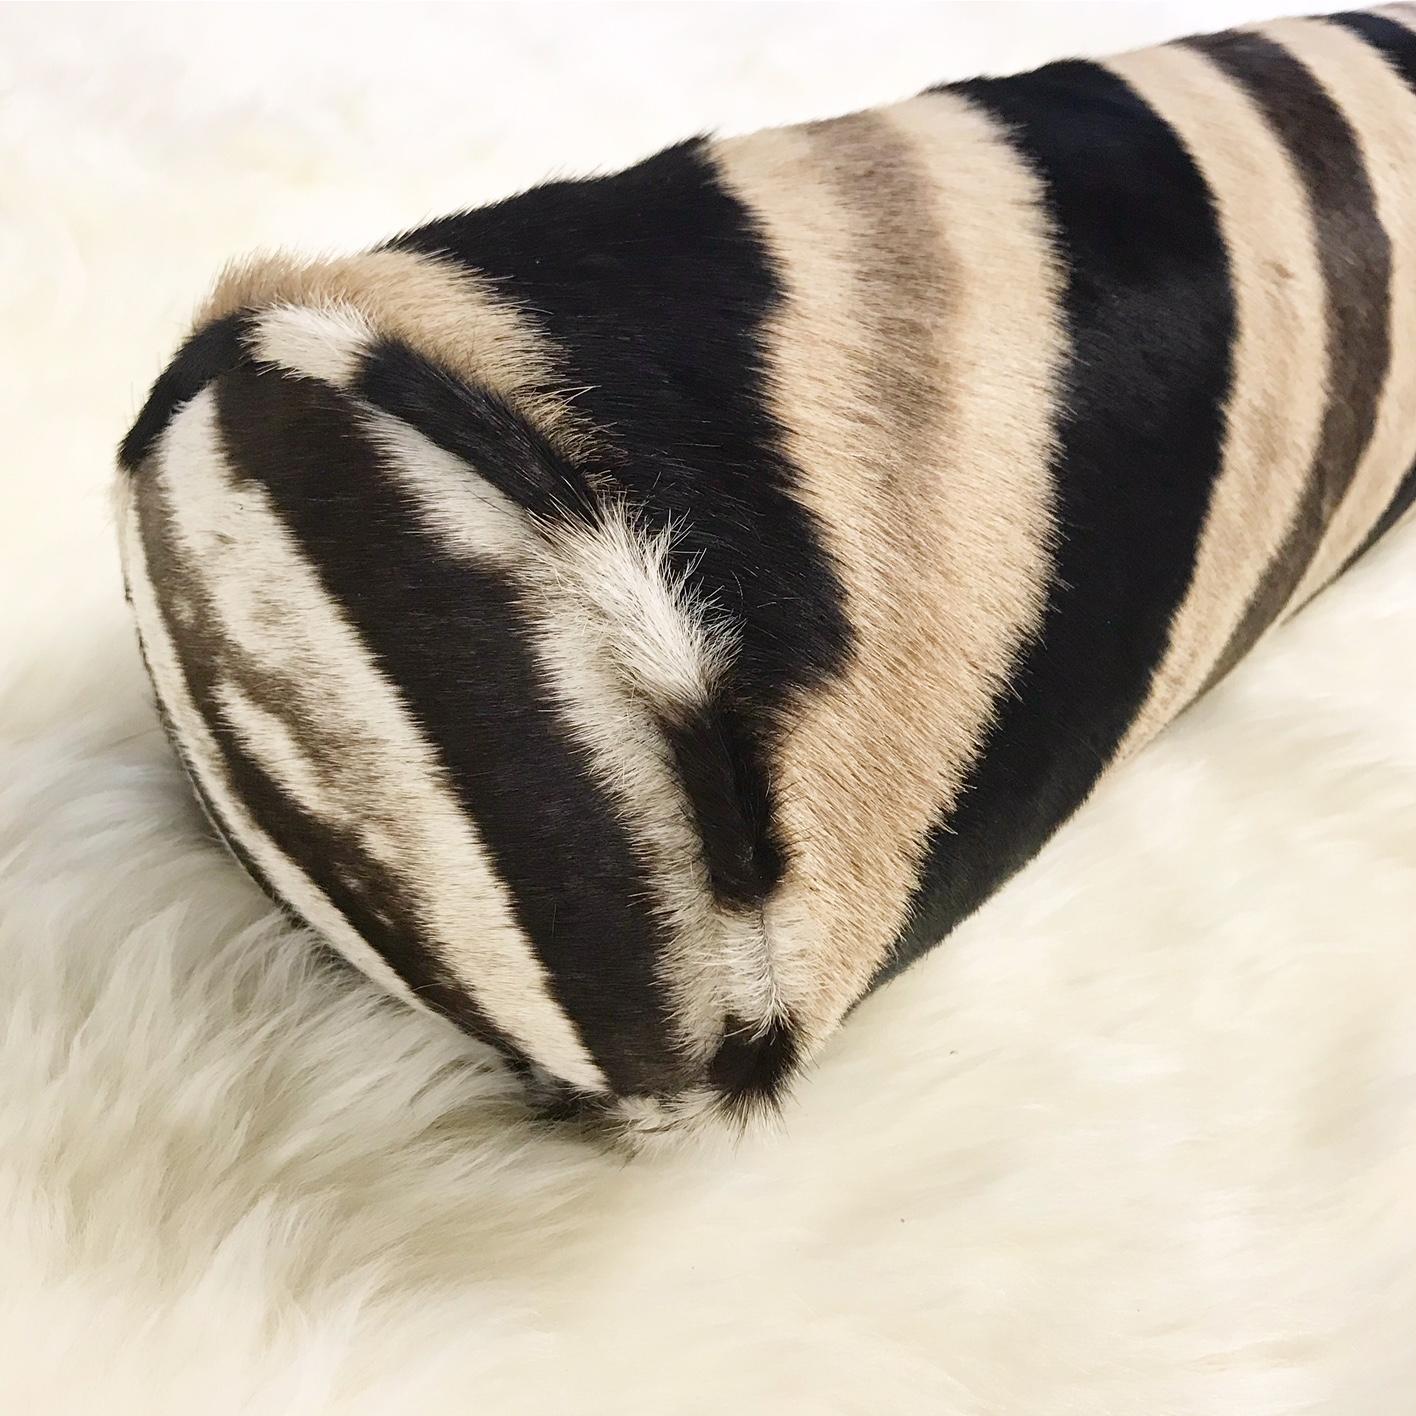 Forsyth Zebra hide pillows are simply the best. The most beautiful hides are selected, hand cut, hand-stitched, and hand stuffed with the finest goose down. Each step is meticulously curated by Saint Louis based Forsyth artisans. Every pillow is a